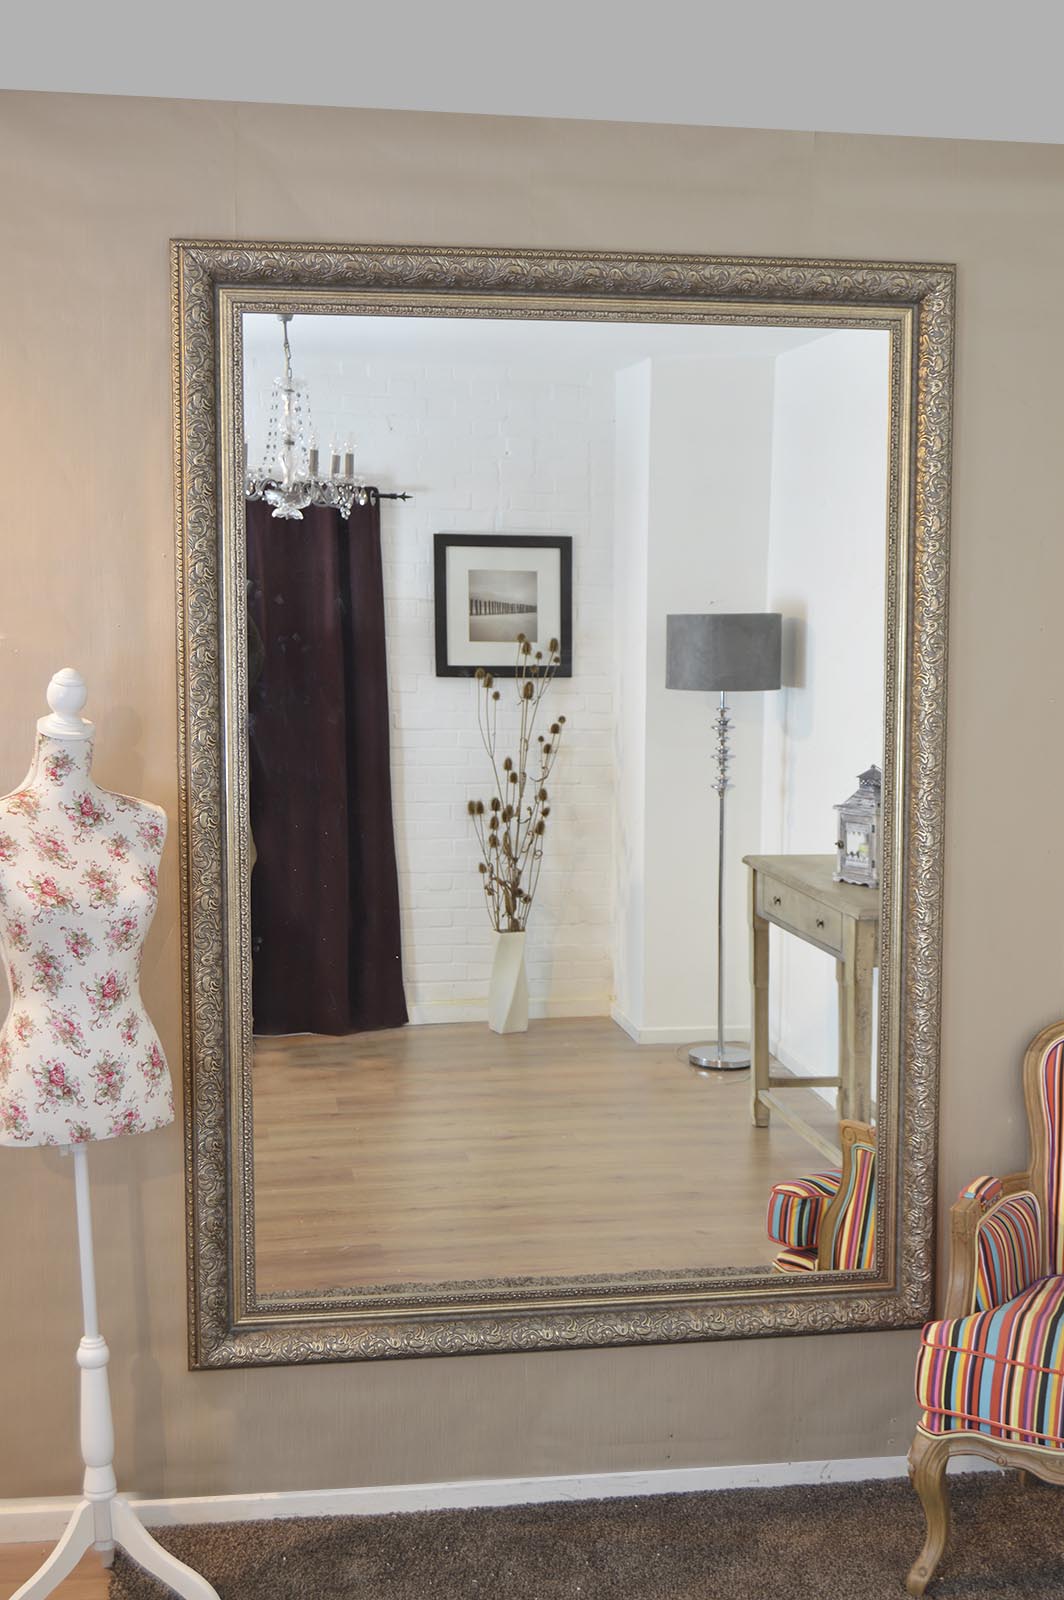 Decorative Wall Mirrors Images - Promotional Wall Mirror Modern Design